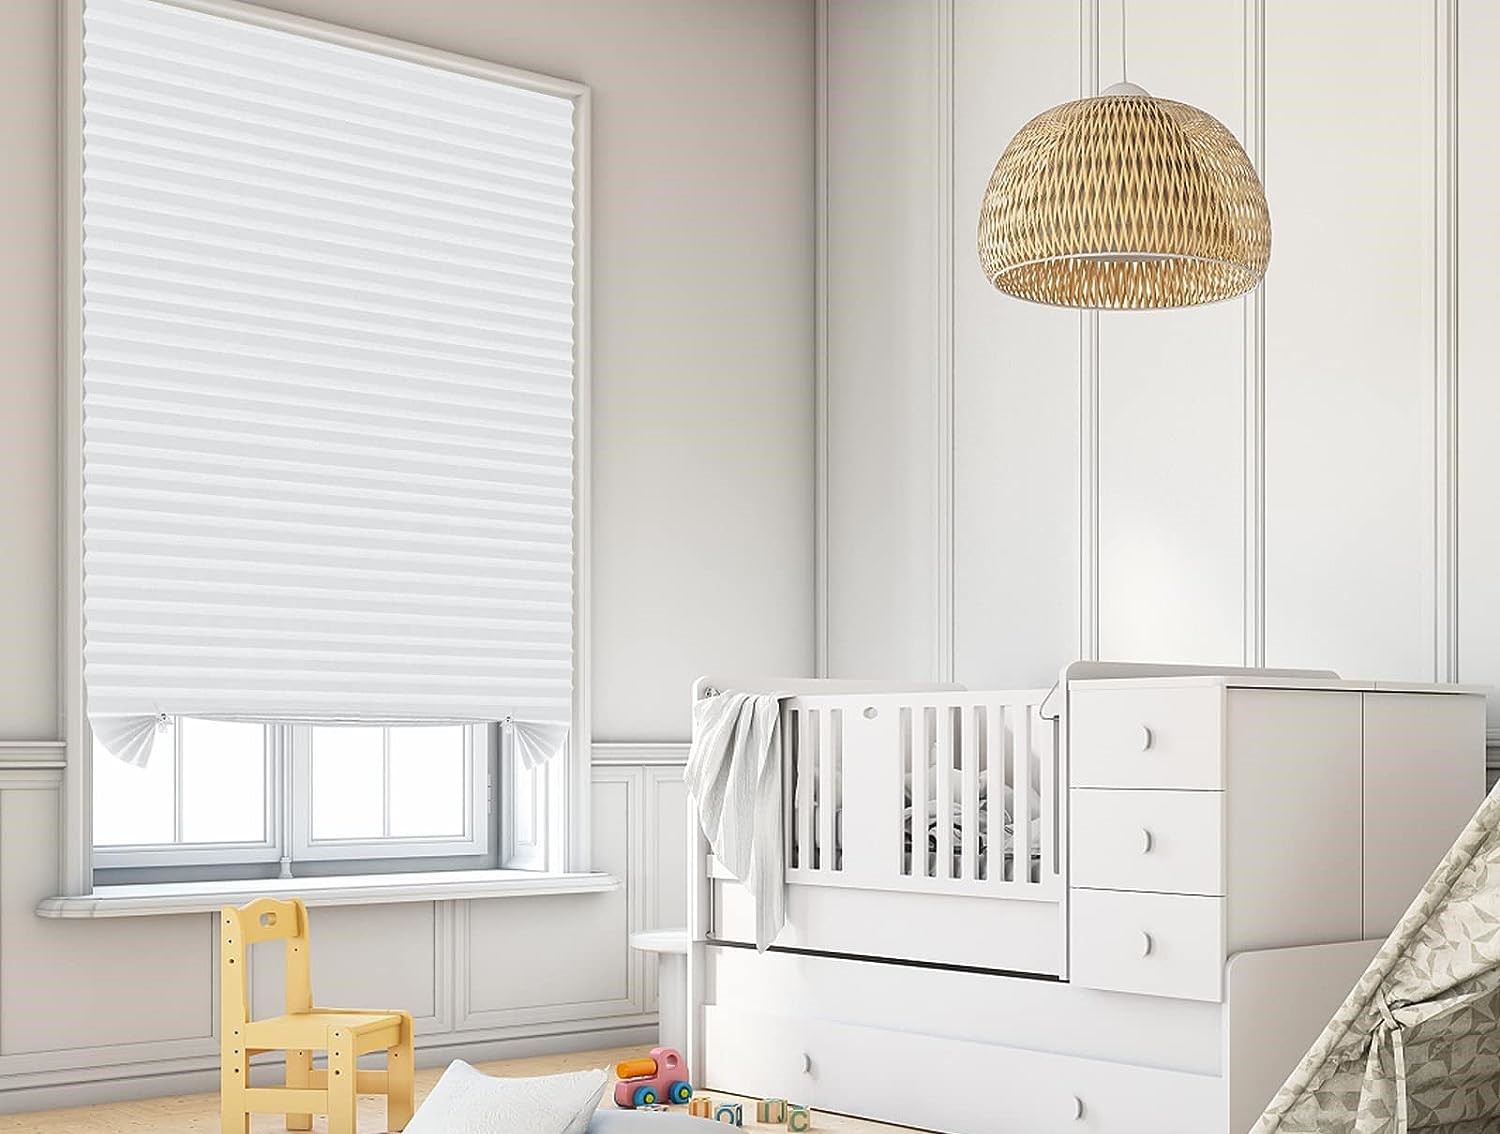 How To Install Blinds Without Drilling